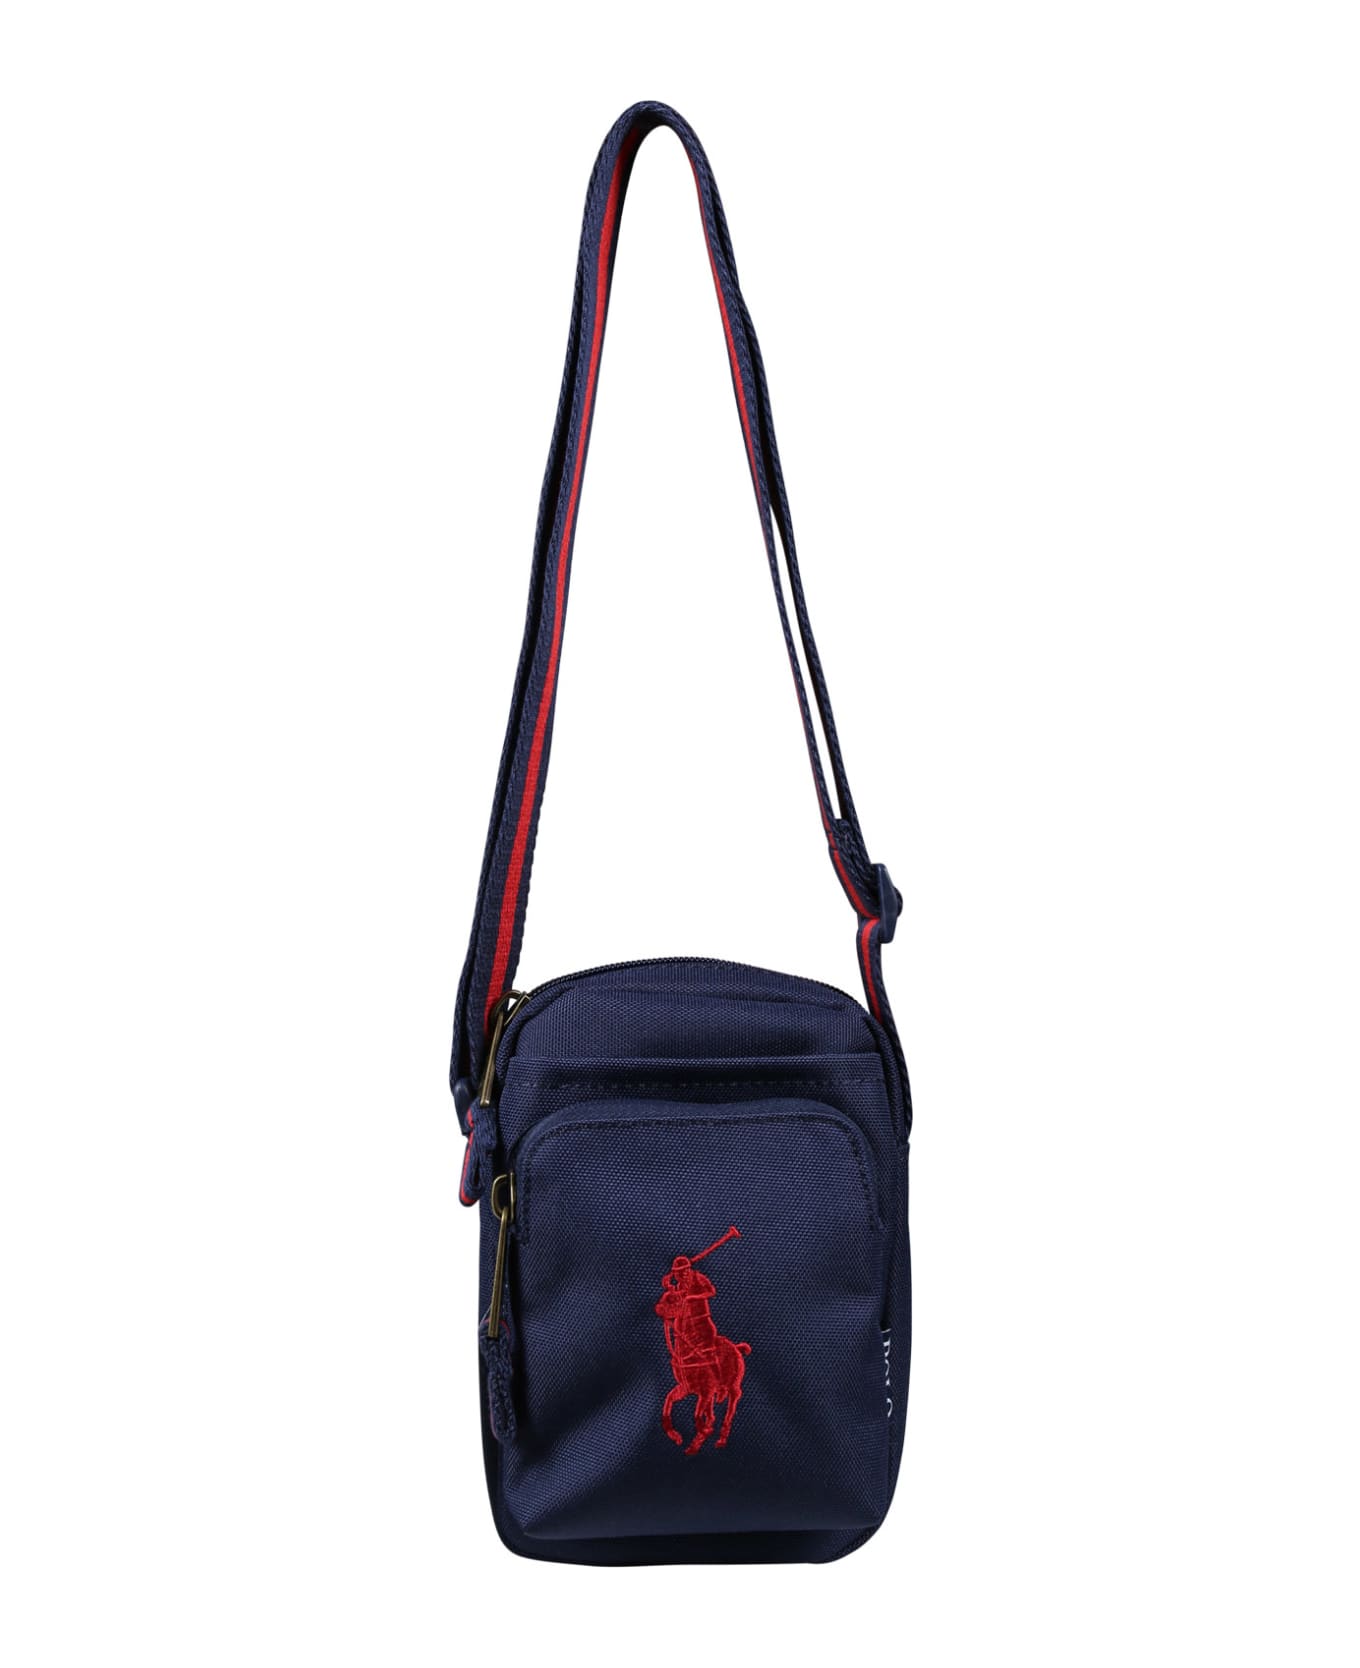 Ralph Lauren Blue Bag For Girl With Logo - Blue アクセサリー＆ギフト